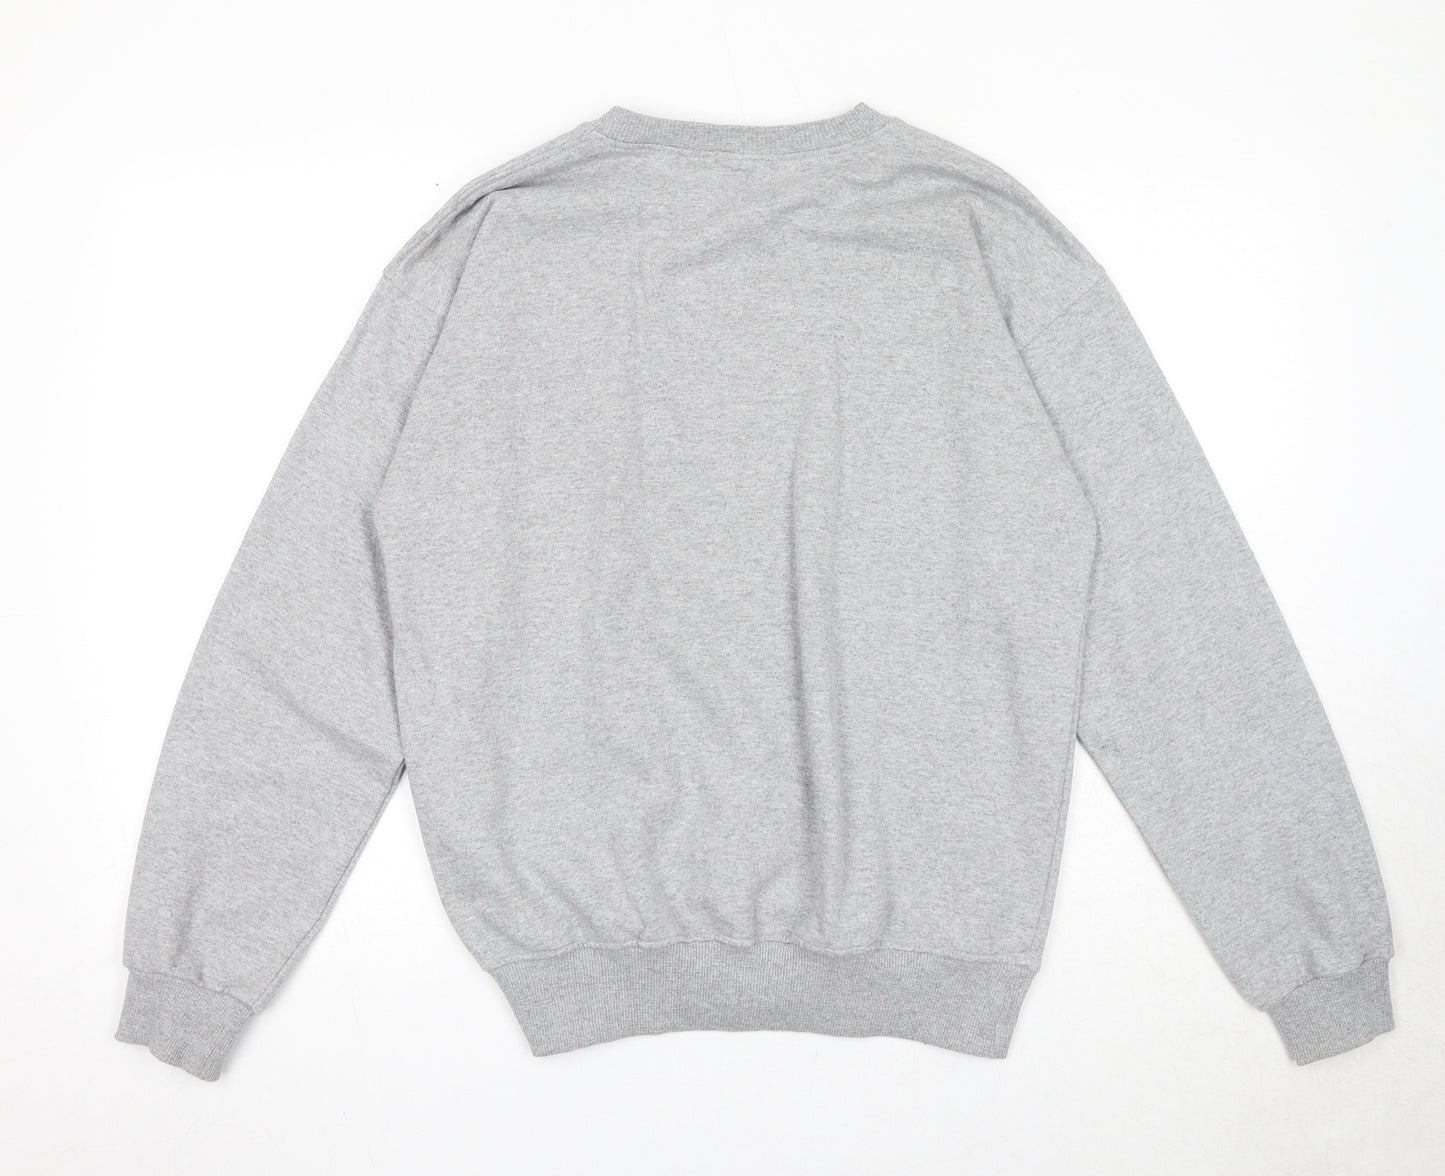 Misspap Womens Grey Polyester Pullover Sweatshirt Size S Pullover - New York